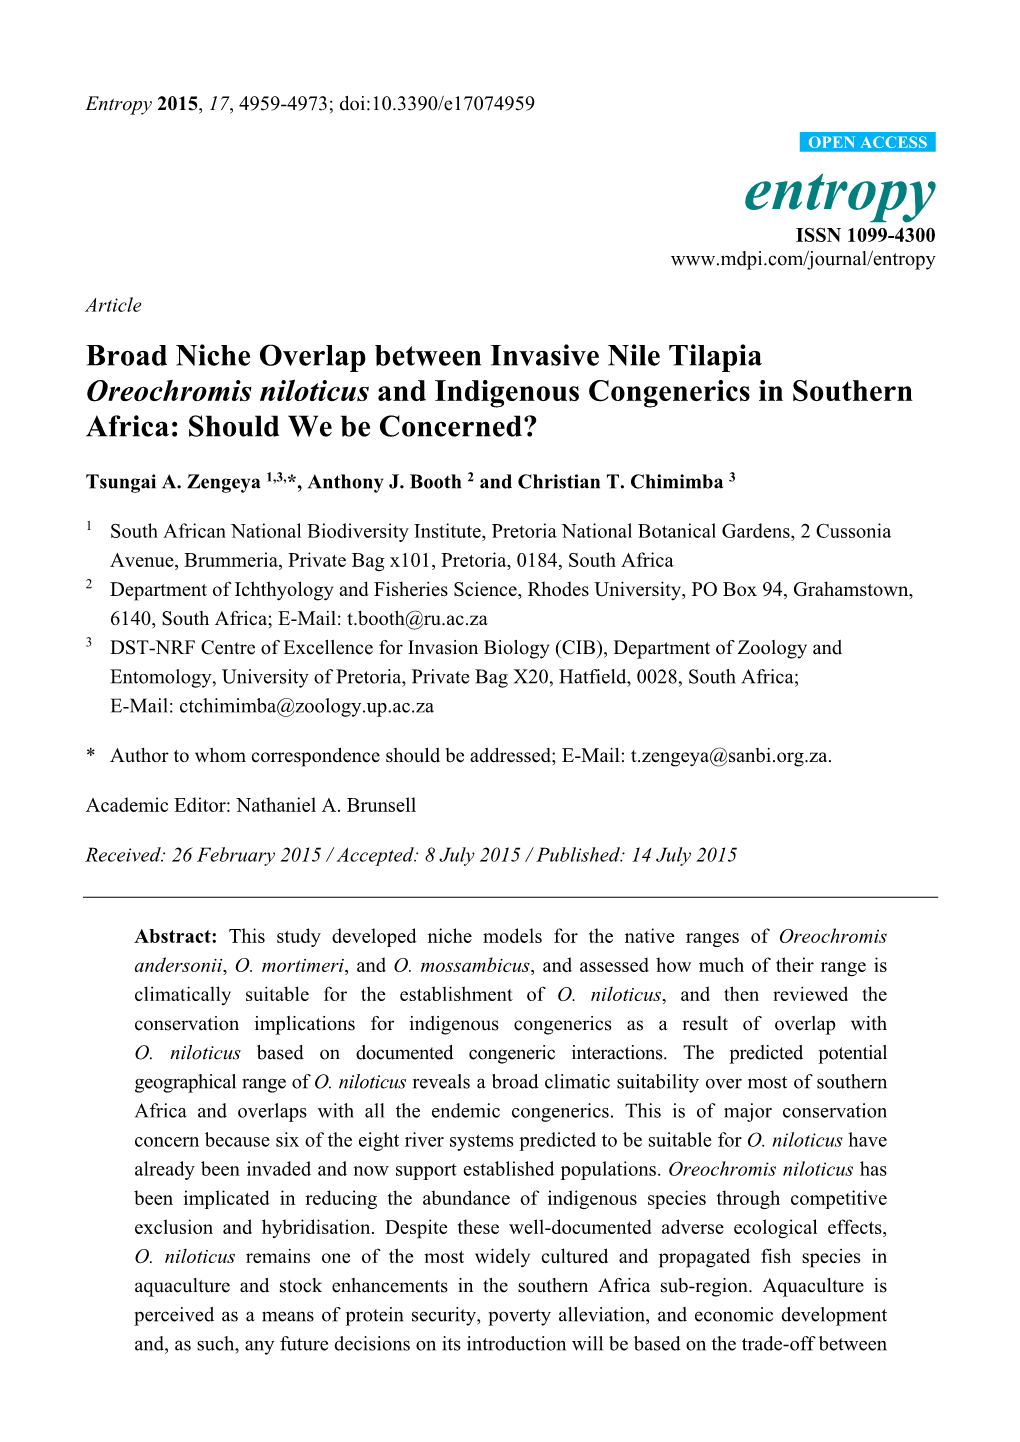 Broad Niche Overlap Between Invasive Nile Tilapia Oreochromis Niloticus and Indigenous Congenerics in Southern Africa: Should We Be Concerned?